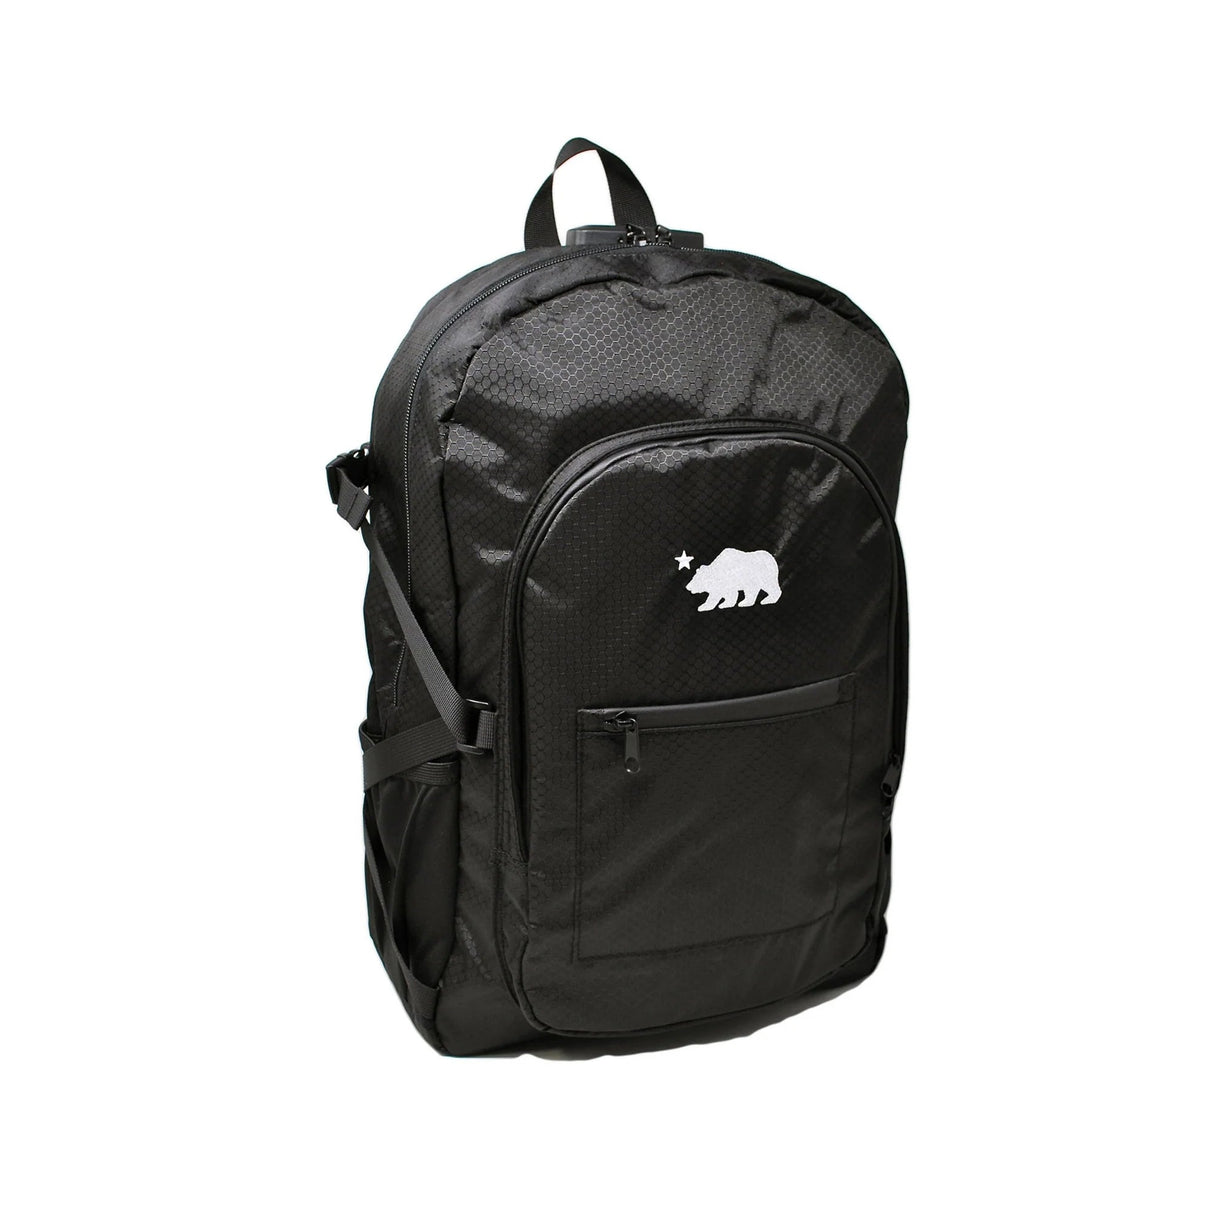 Cali Crusher Cali Backpack Standard in Black/White, front view on seamless white background